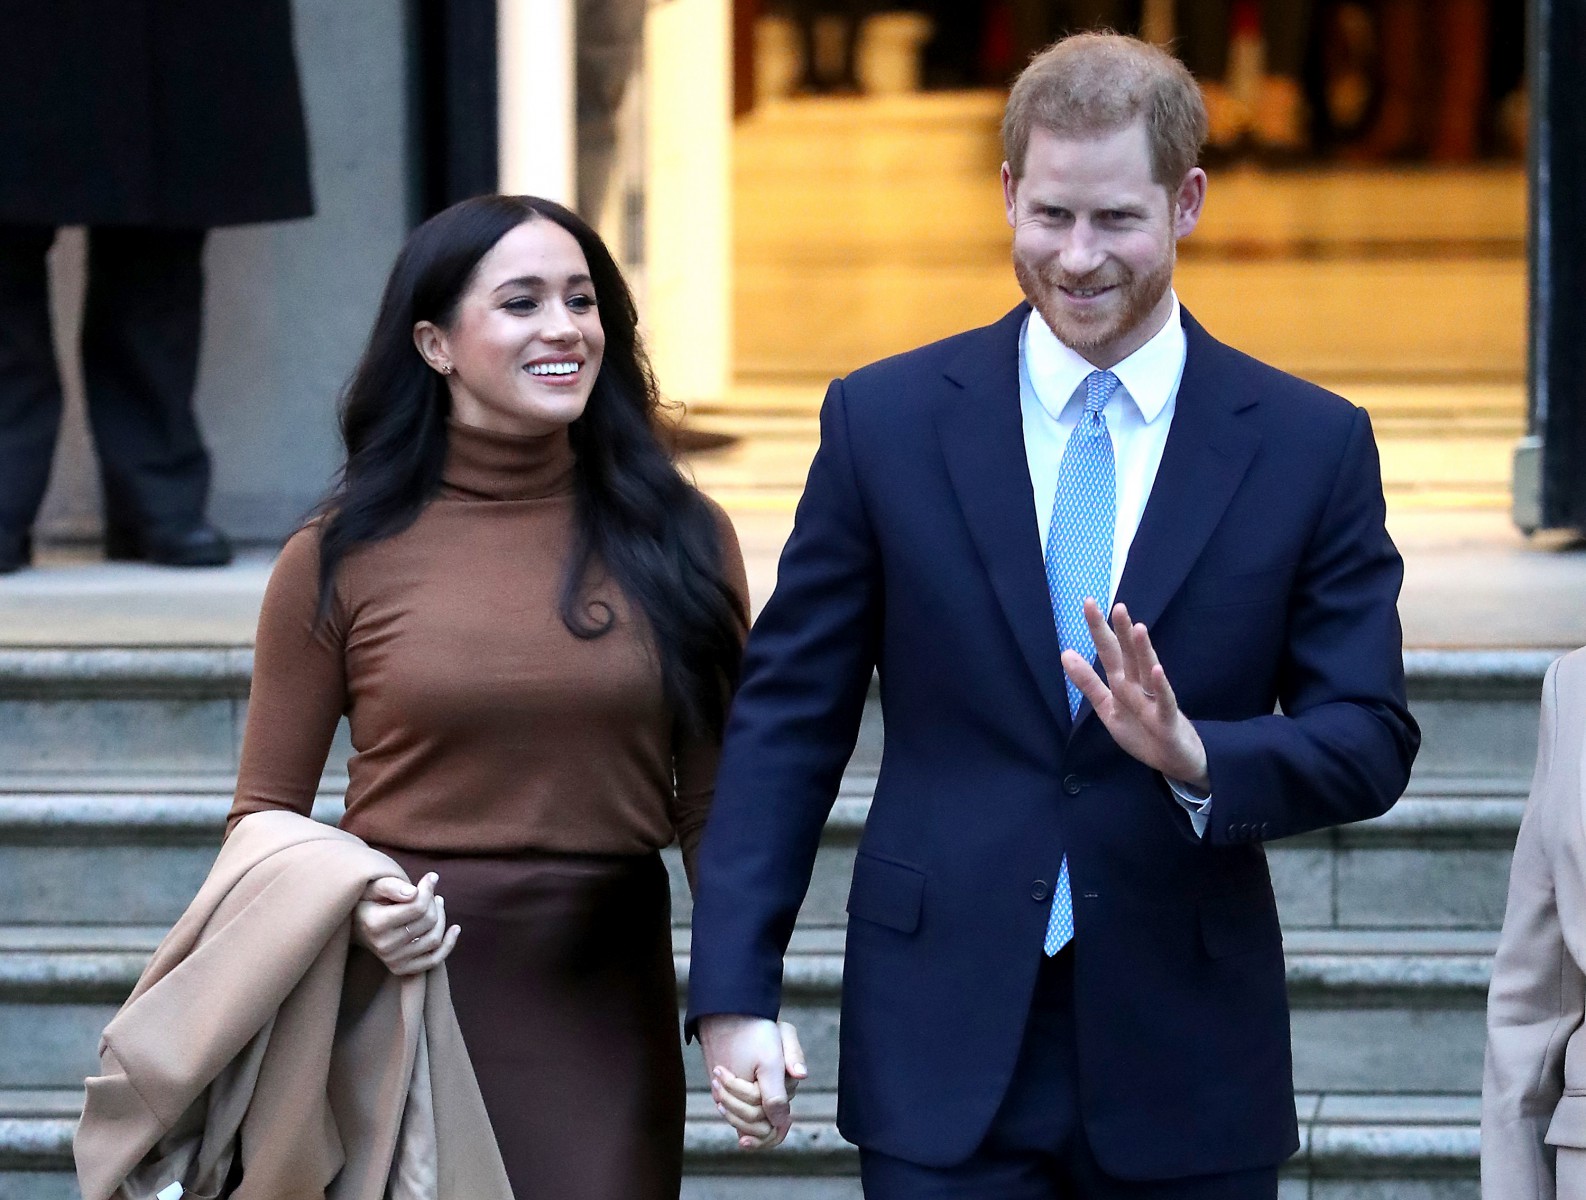 Meghan and Harry have moved to Canada part-time after announcing they were stepping down as royals